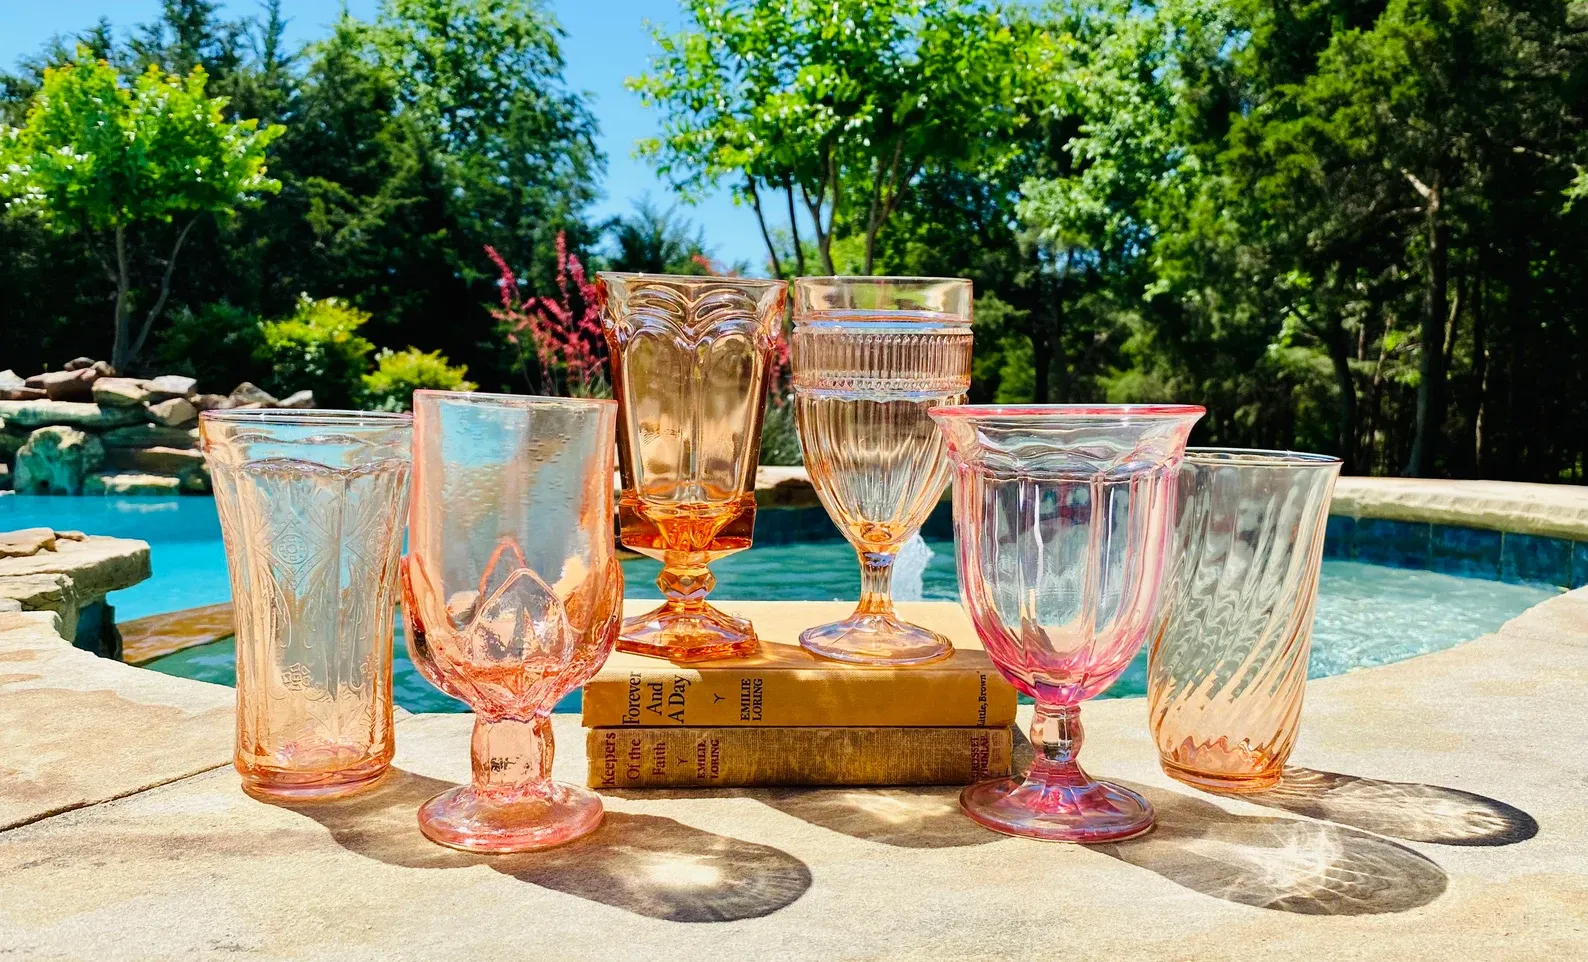 Elle Decor Set of 6 Wine Glasses, Blue Colored Glassware Set Colored Wine  Glasses, Vintage Glassware Sets, Water Goblets for Party, Wedding, & Daily